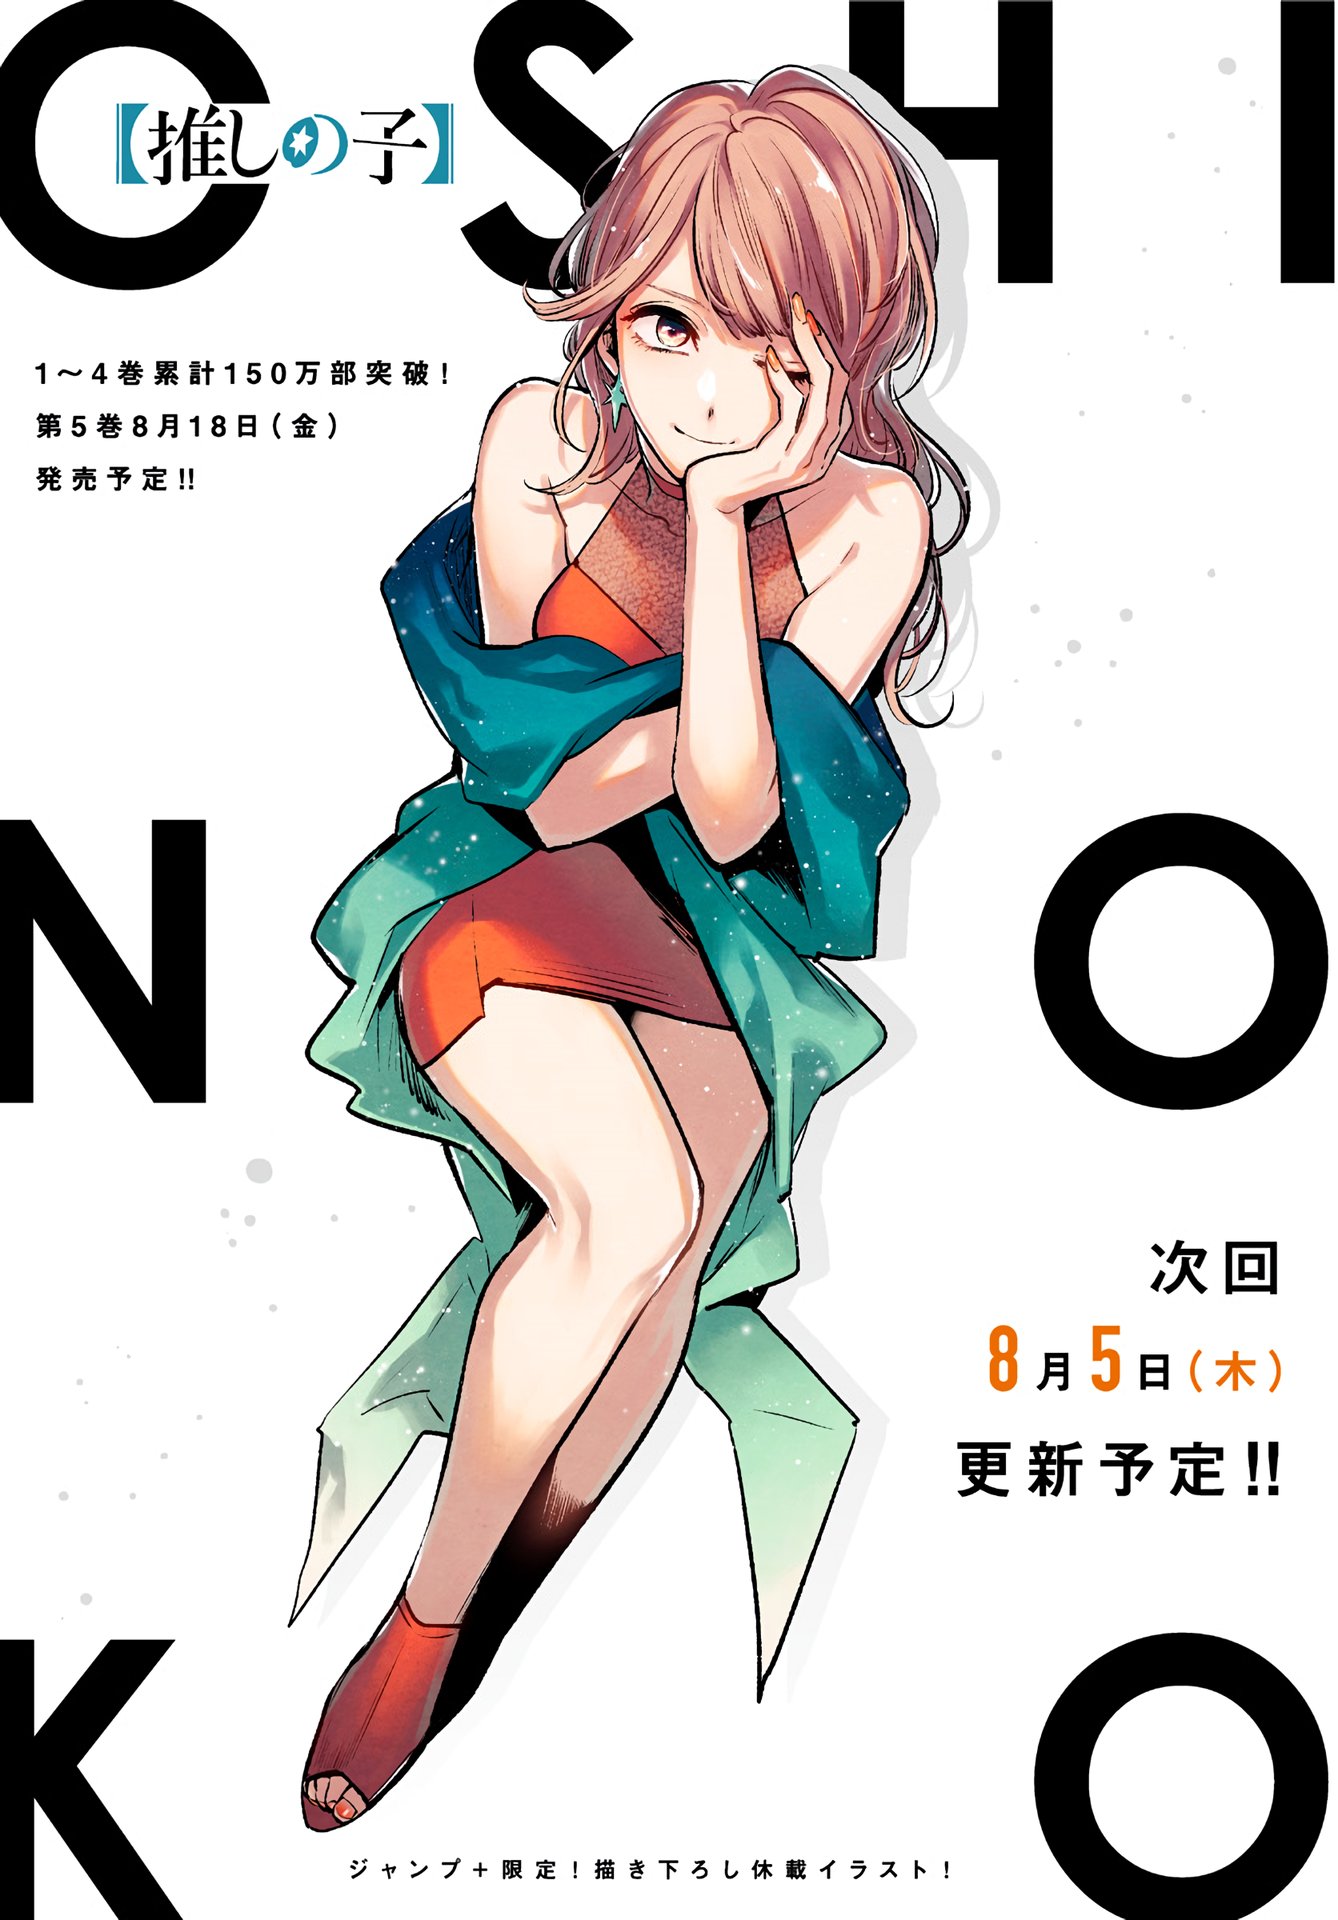 Oshi no Ko Info & News - Unofficial on X: Special illustration